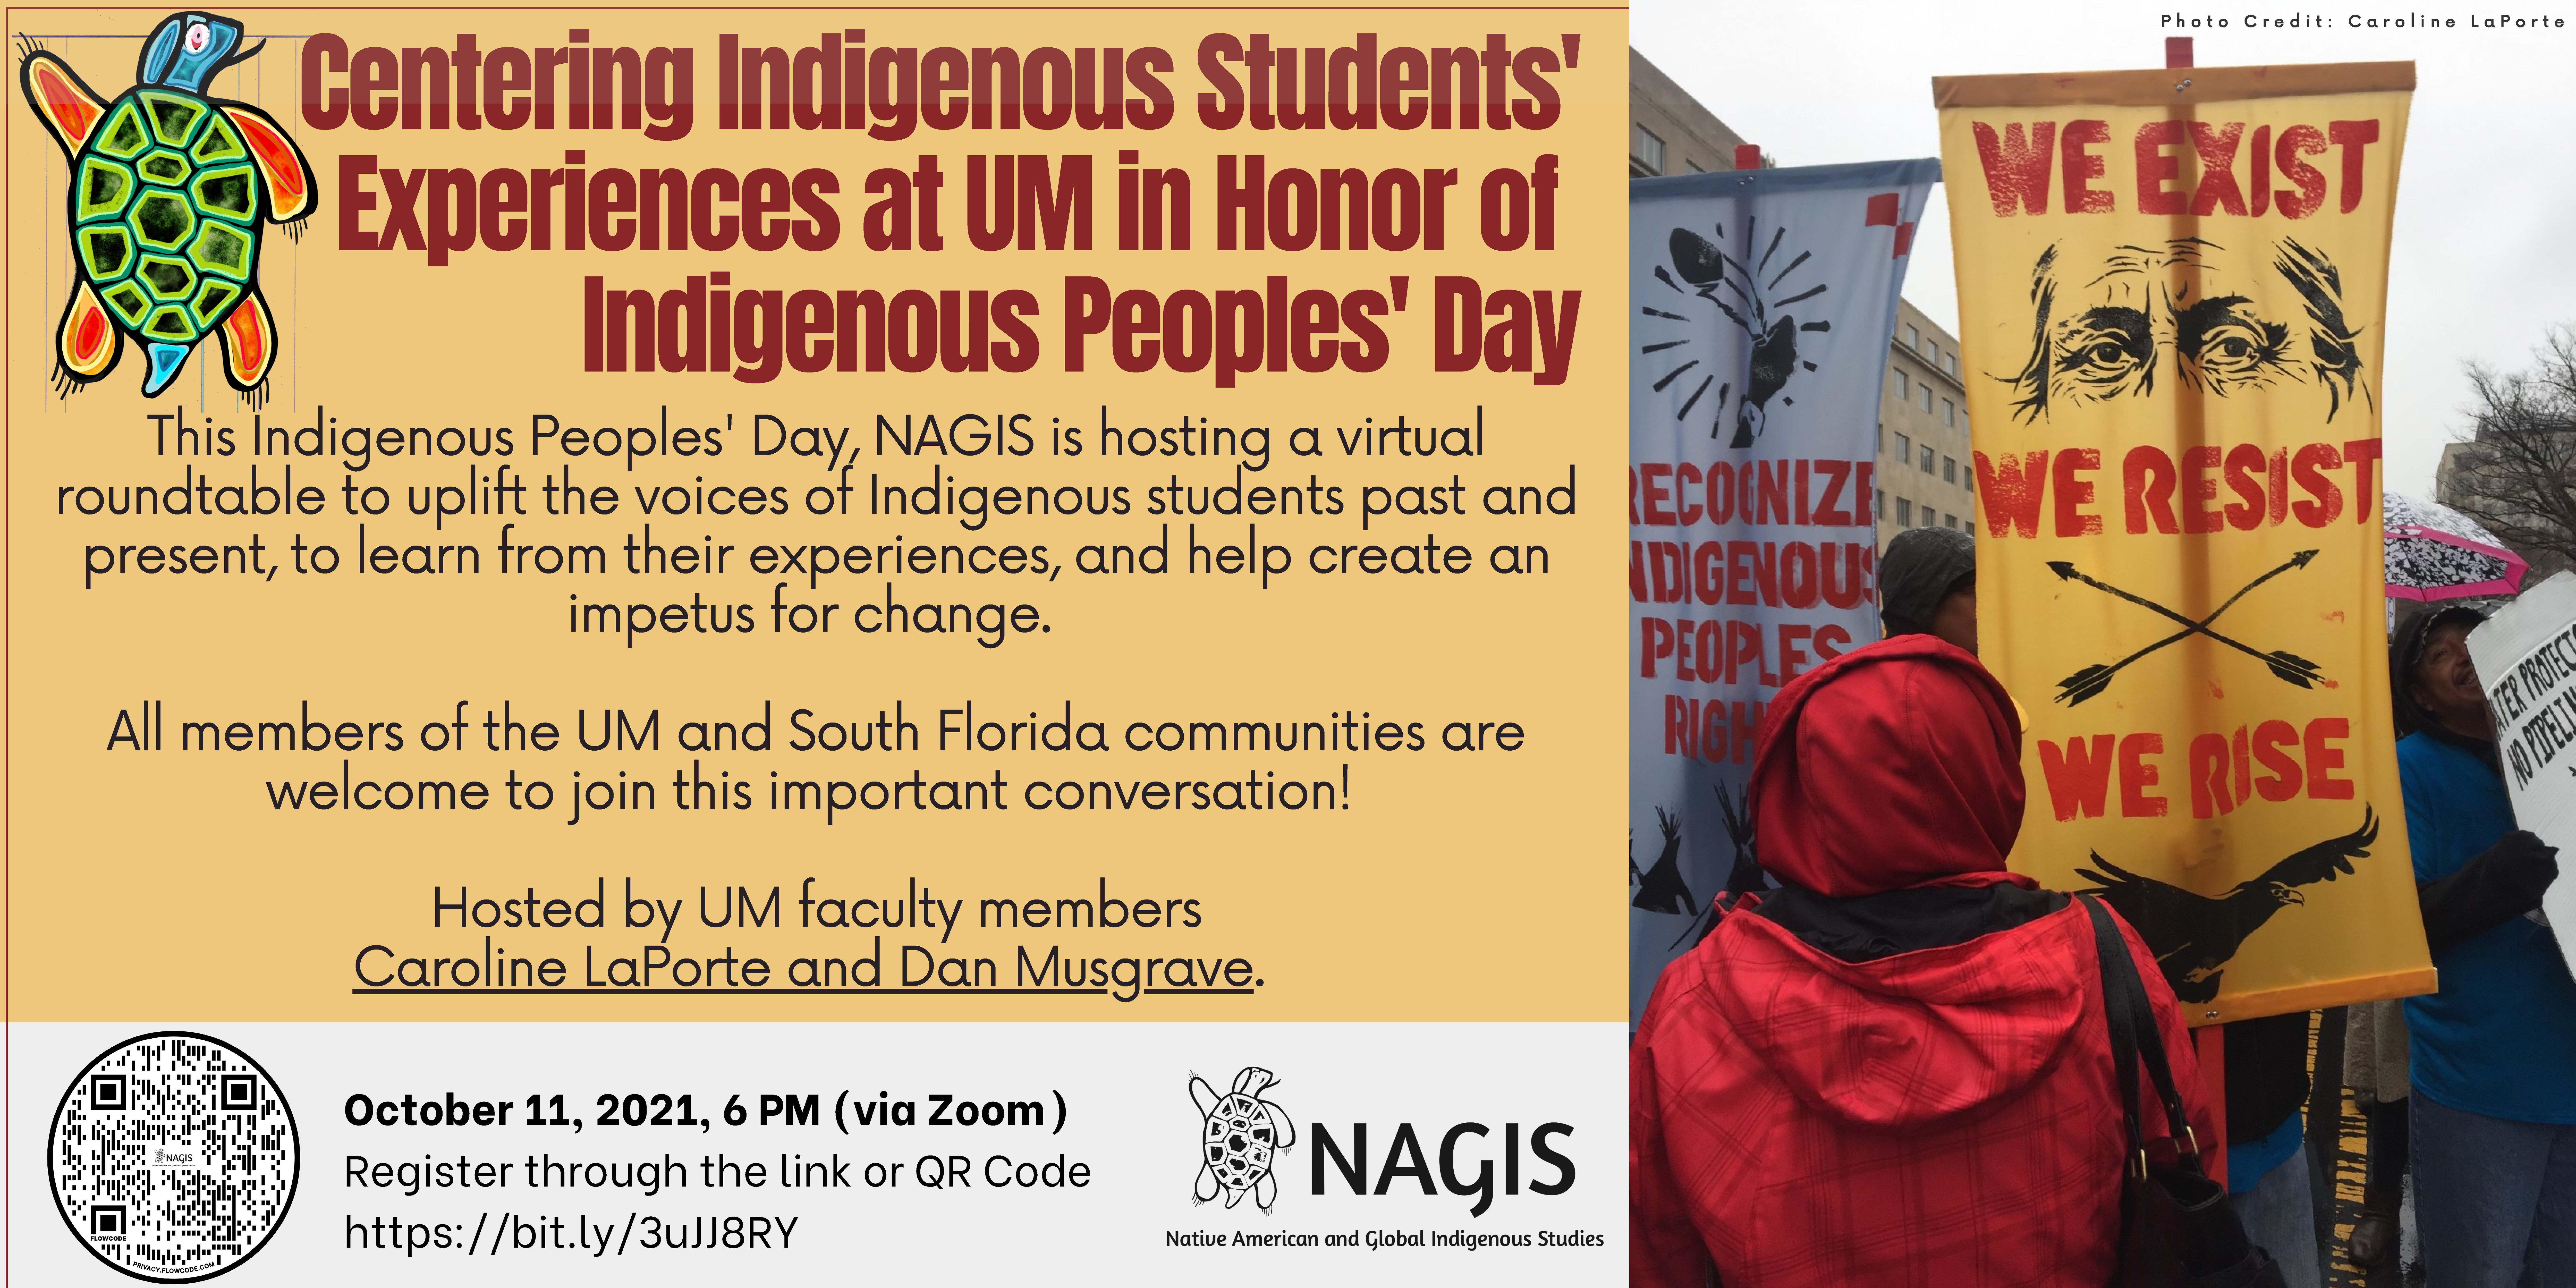 This is a flyer for the Centering Indigenous Students' Experience at UM. This flyer is mostly text. There is one image of a poster at a march advocating for Indigenous Peoples' rights. The poster reads we exist, we resist, we rise.